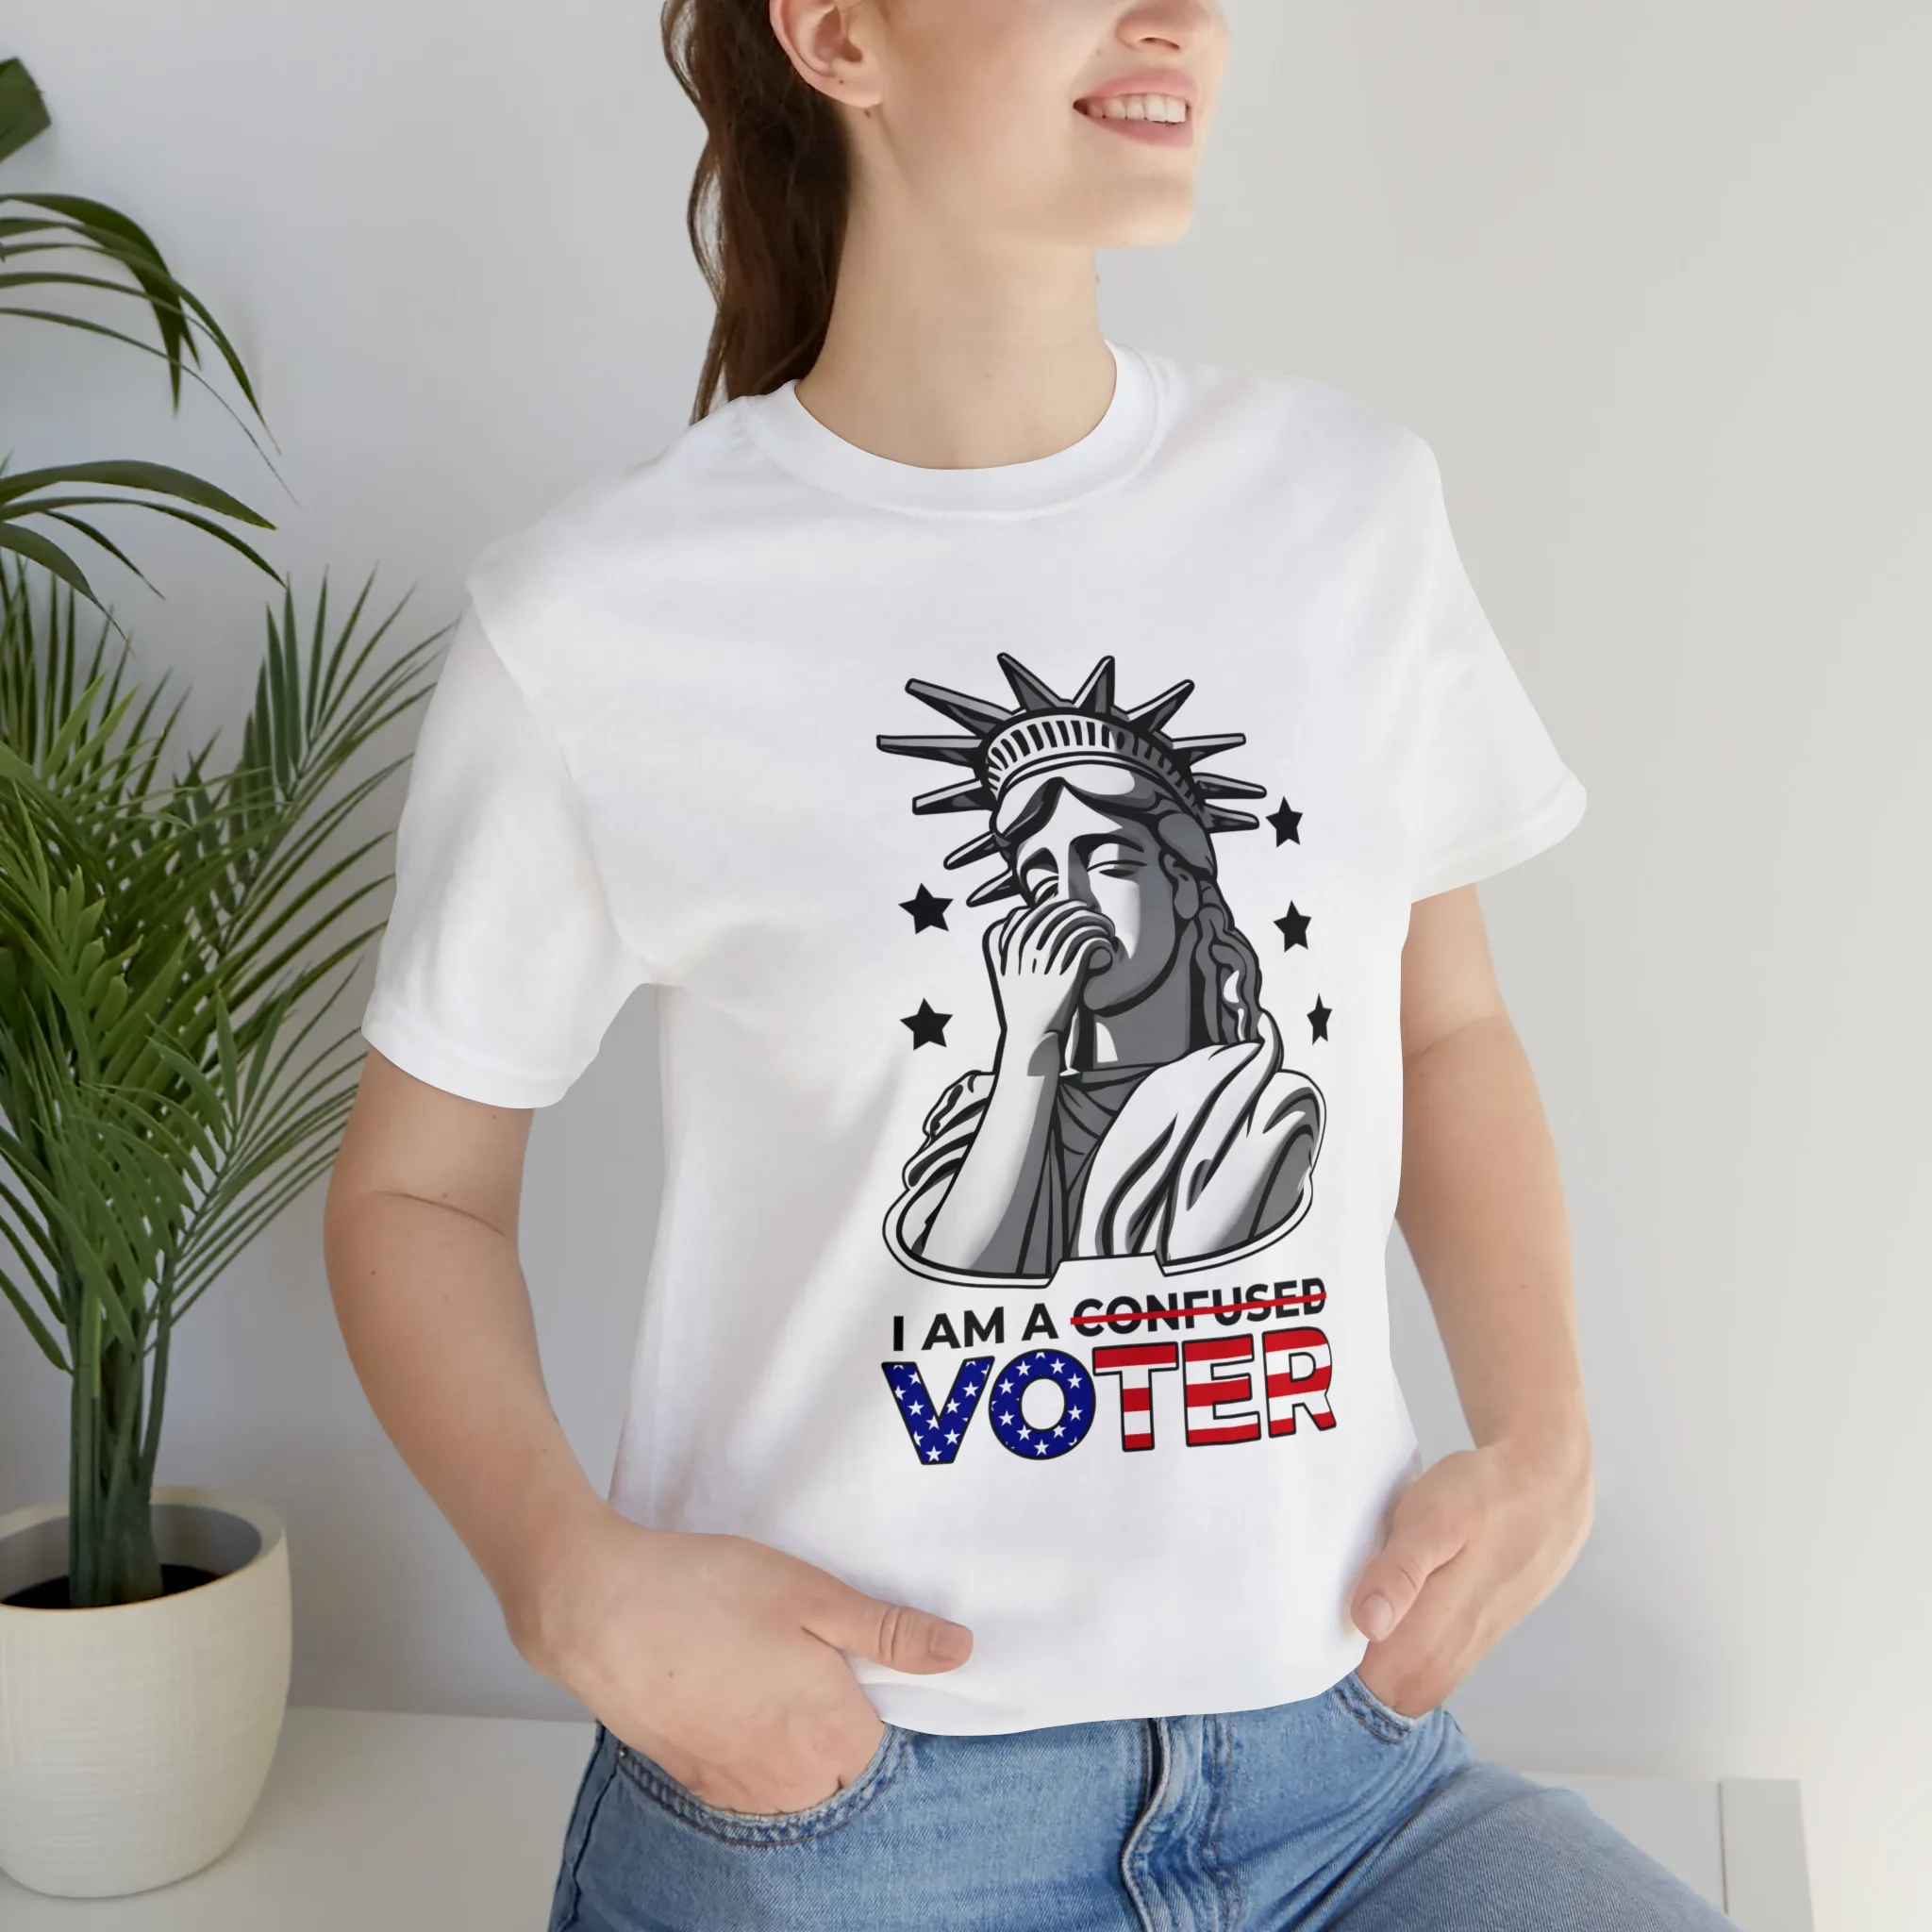 US Election T-shirt | Electing the Right Candidate Matters